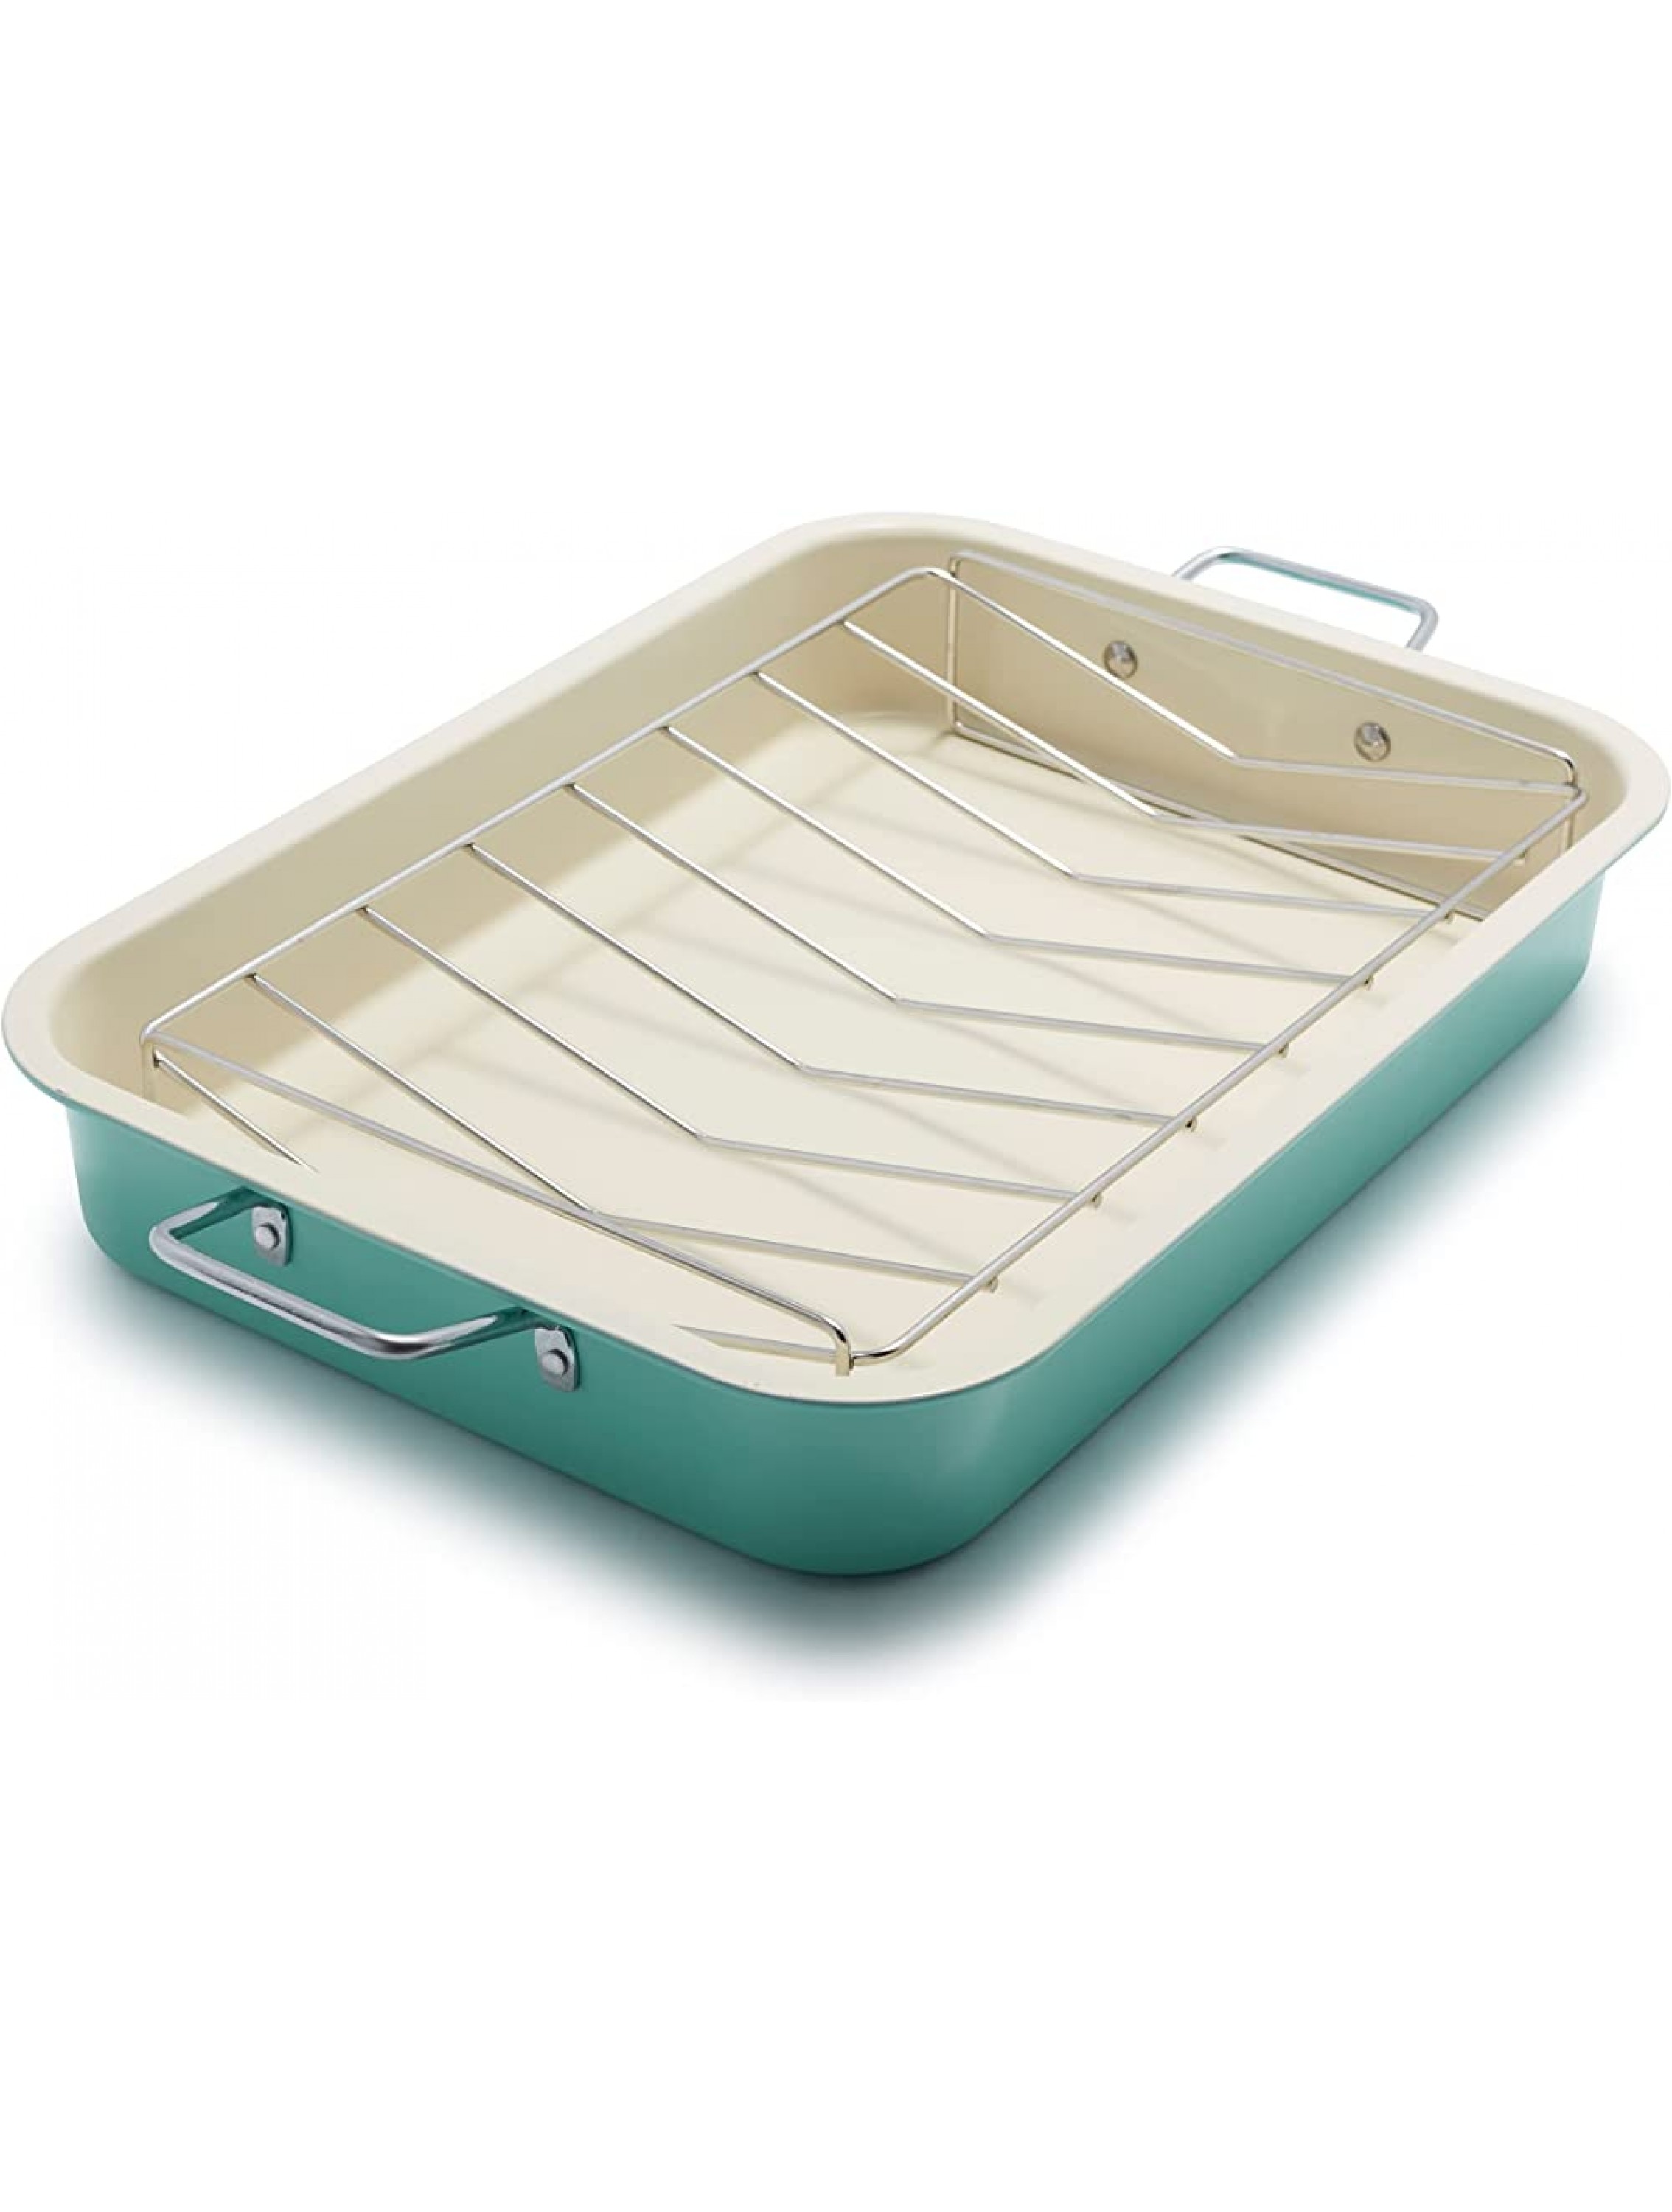 GreenLife Soft Grip Healthy Ceramic Nonstick 16.5 x 12 Roasting Pan with Stainless Steel Roaster Rack PFAS-Free Dishwasher Safe Turquoise - B8KSSR6RQ